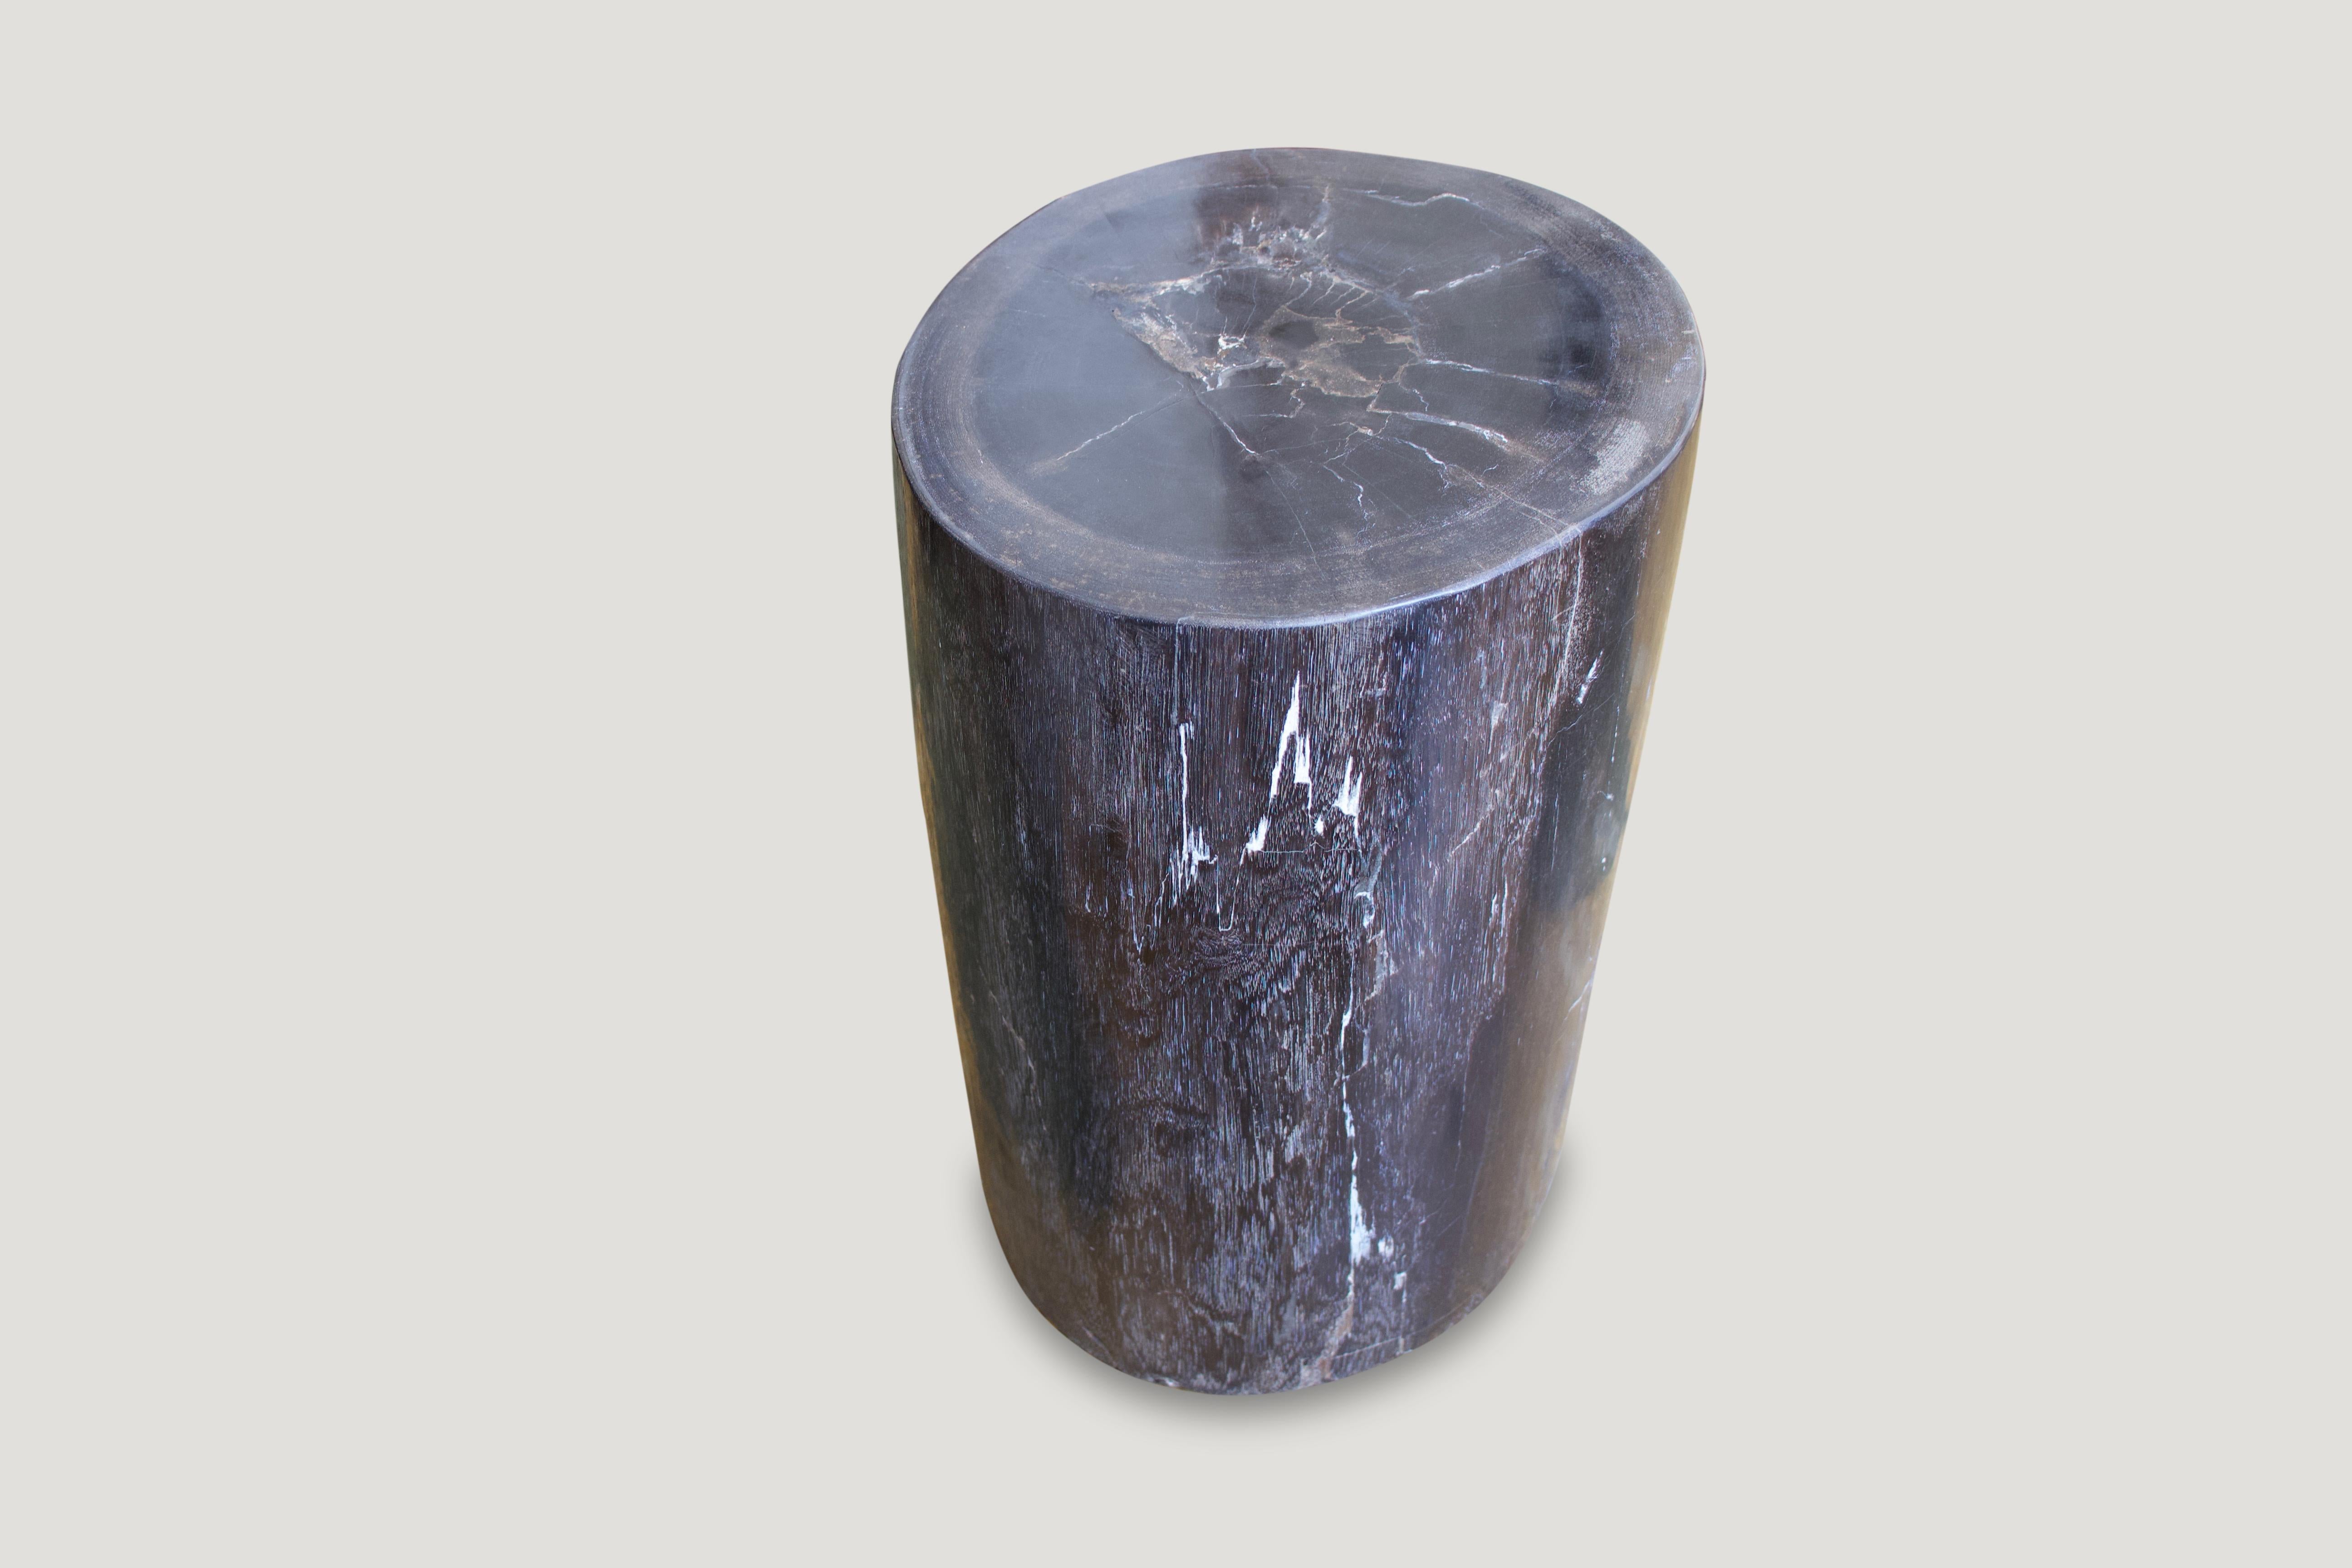 Classic dark tones with a dash of white in this fabulous high quality petrified wood side table. We have a pair available cut from the same petrified log. The images are for the one shown and the price reflects one.

We source the highest quality